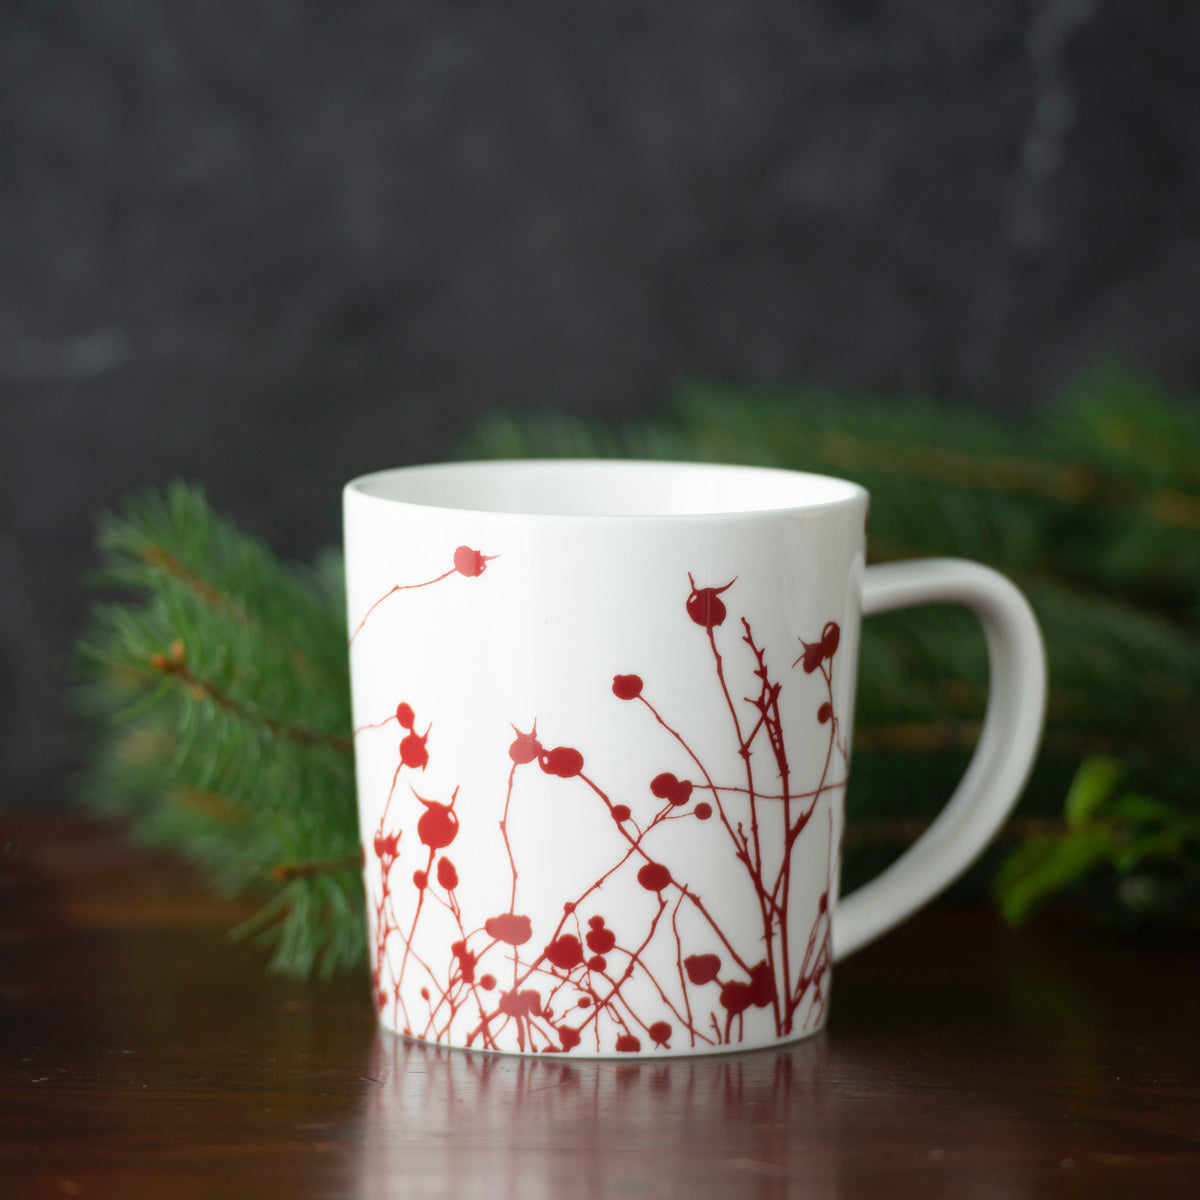 A Winterberries Mug Crimson by Caskata Artisanal Home with red flowers on it sits on a table.